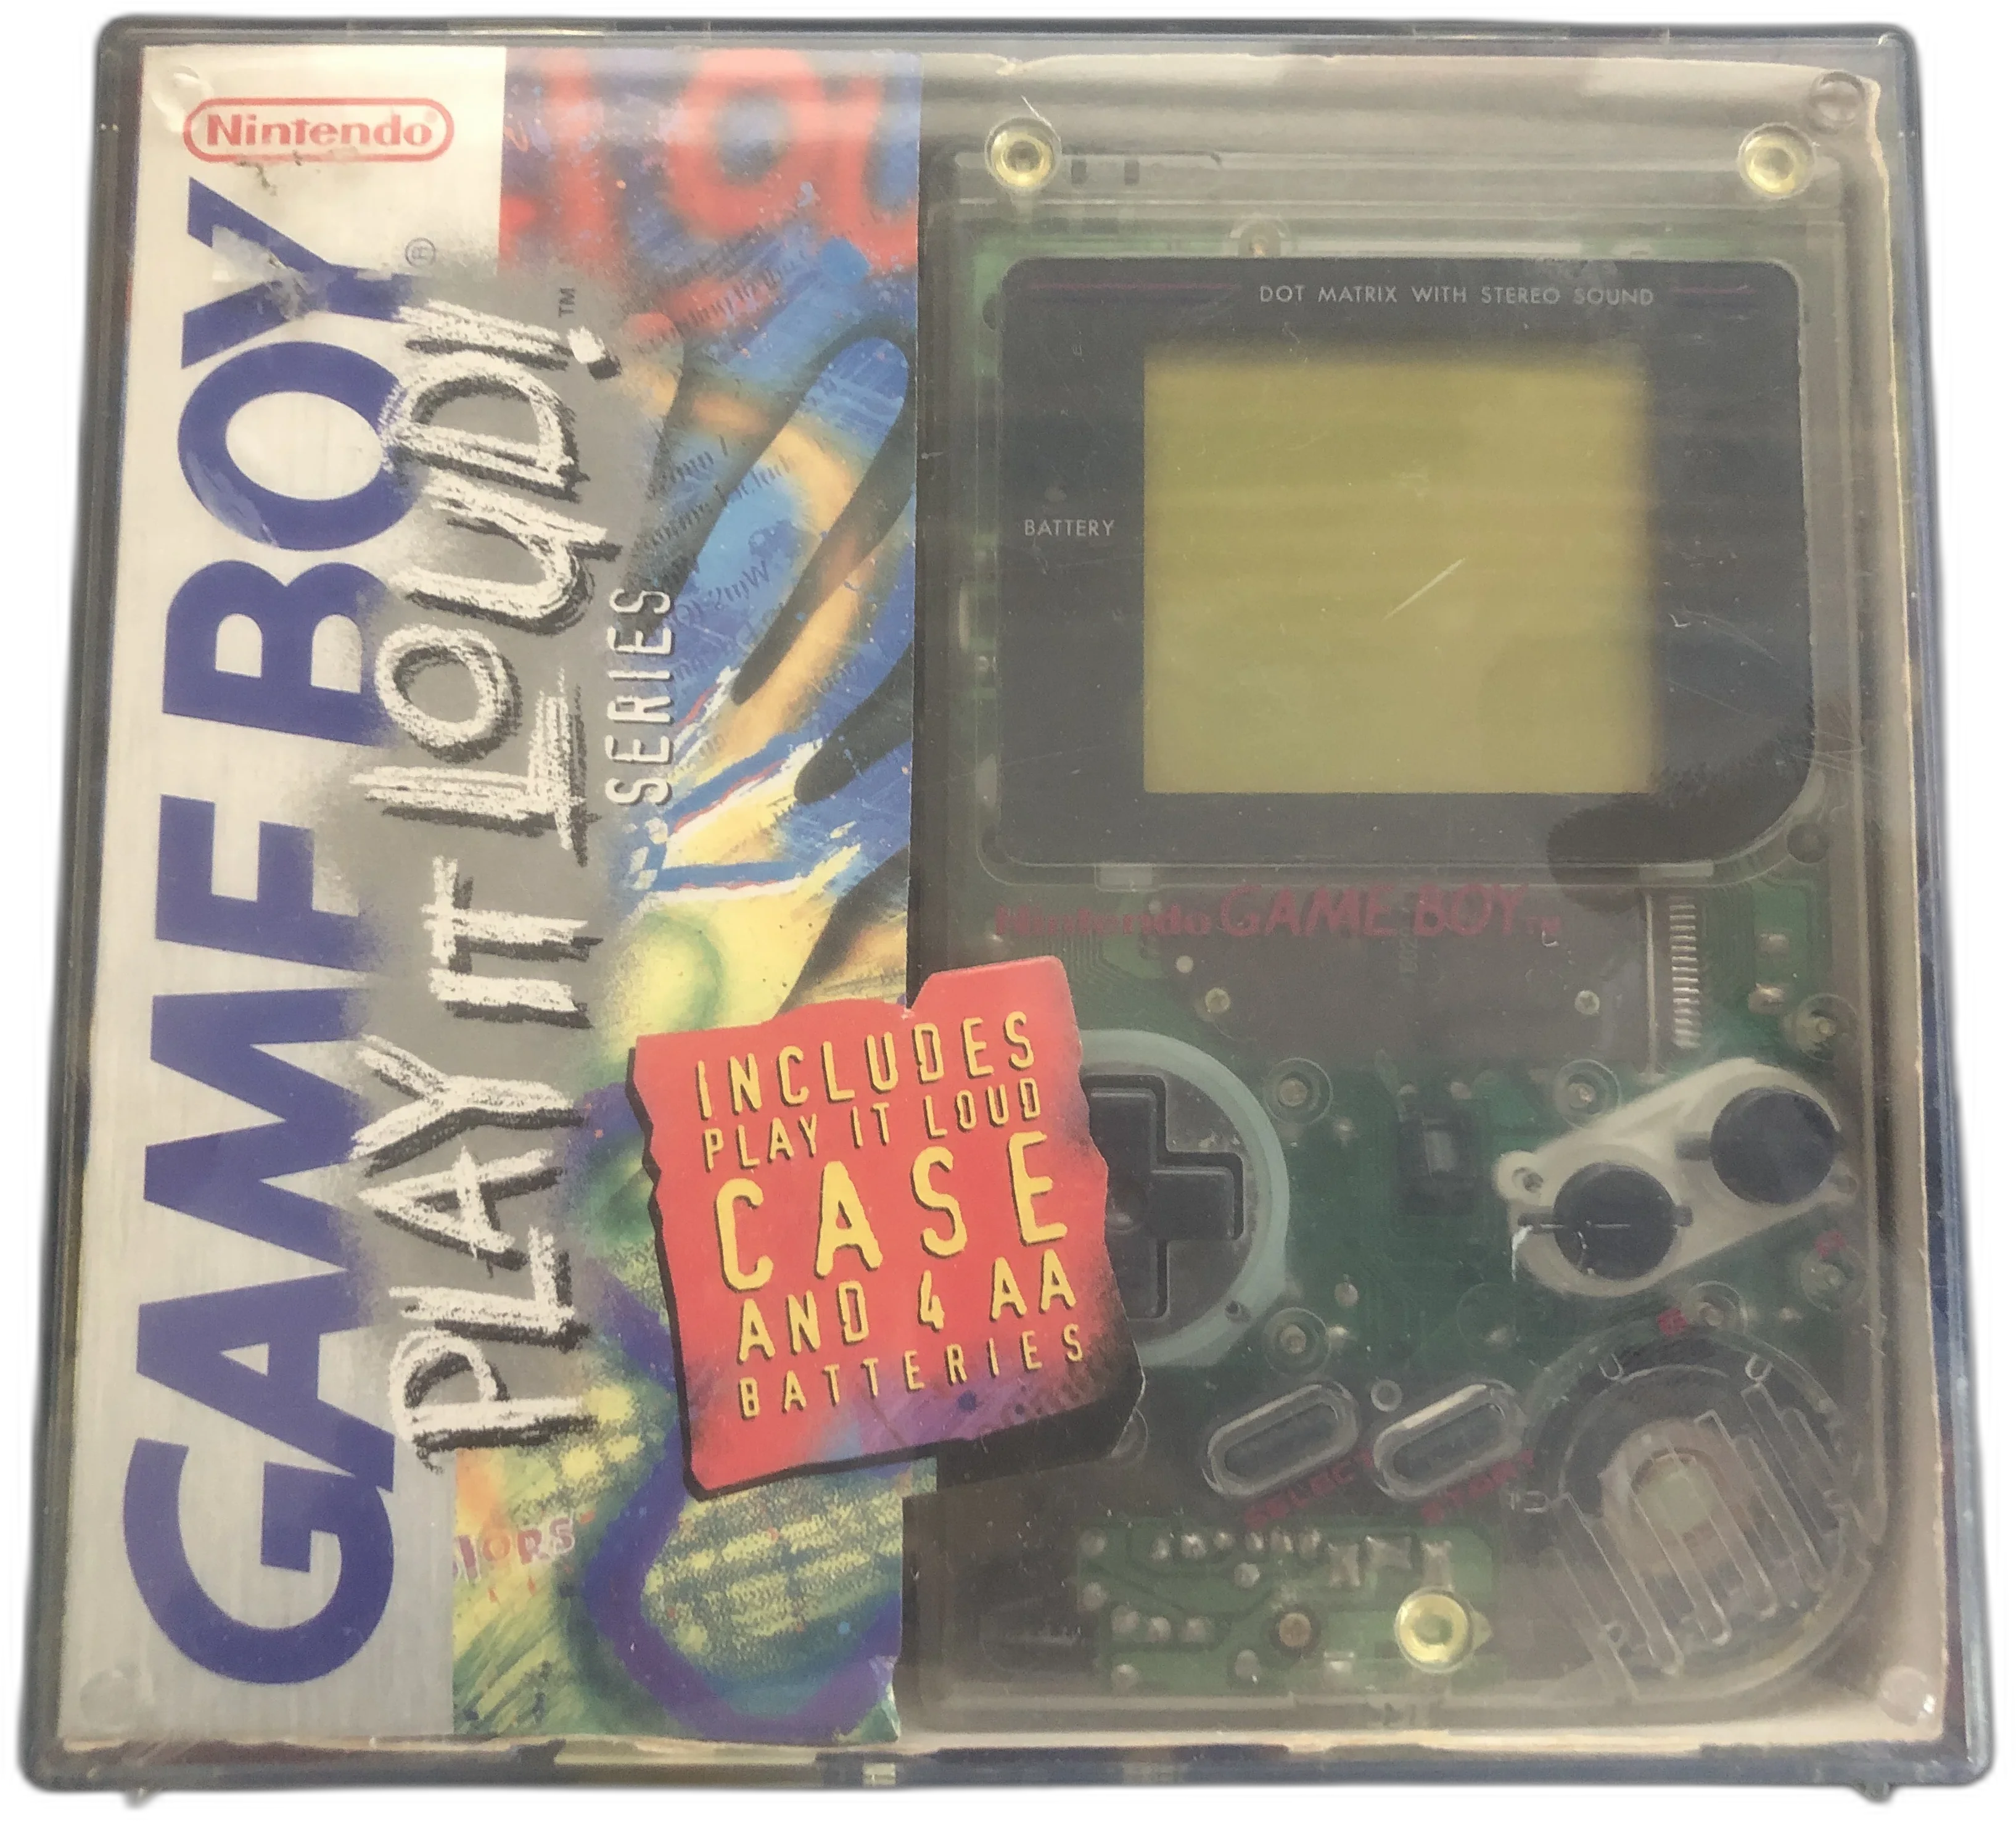  Nintendo Game Boy Play It Loud Crystal Case Clear Console